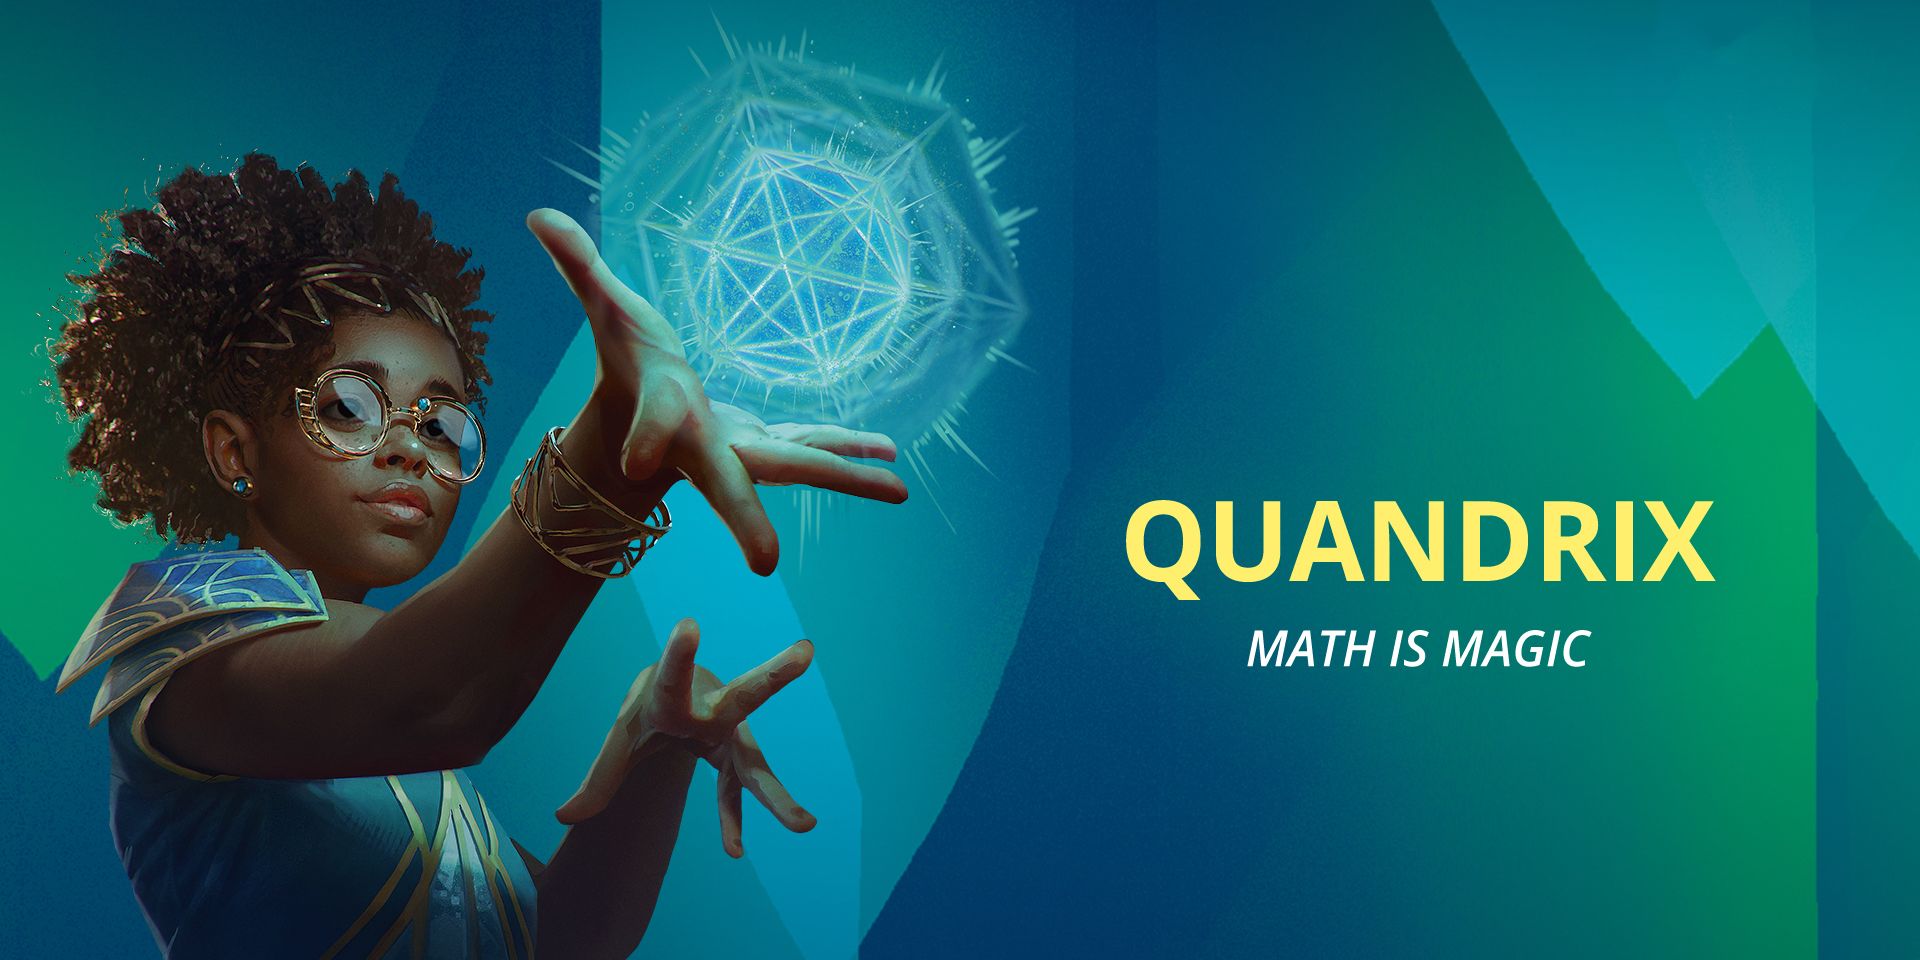 A dark-skinned human mage with frizzy hair, wearing coppery glasses and holding up a glowing polyhedron. Beside her is the text &quot;QUANDRIX - math is magic&quot;